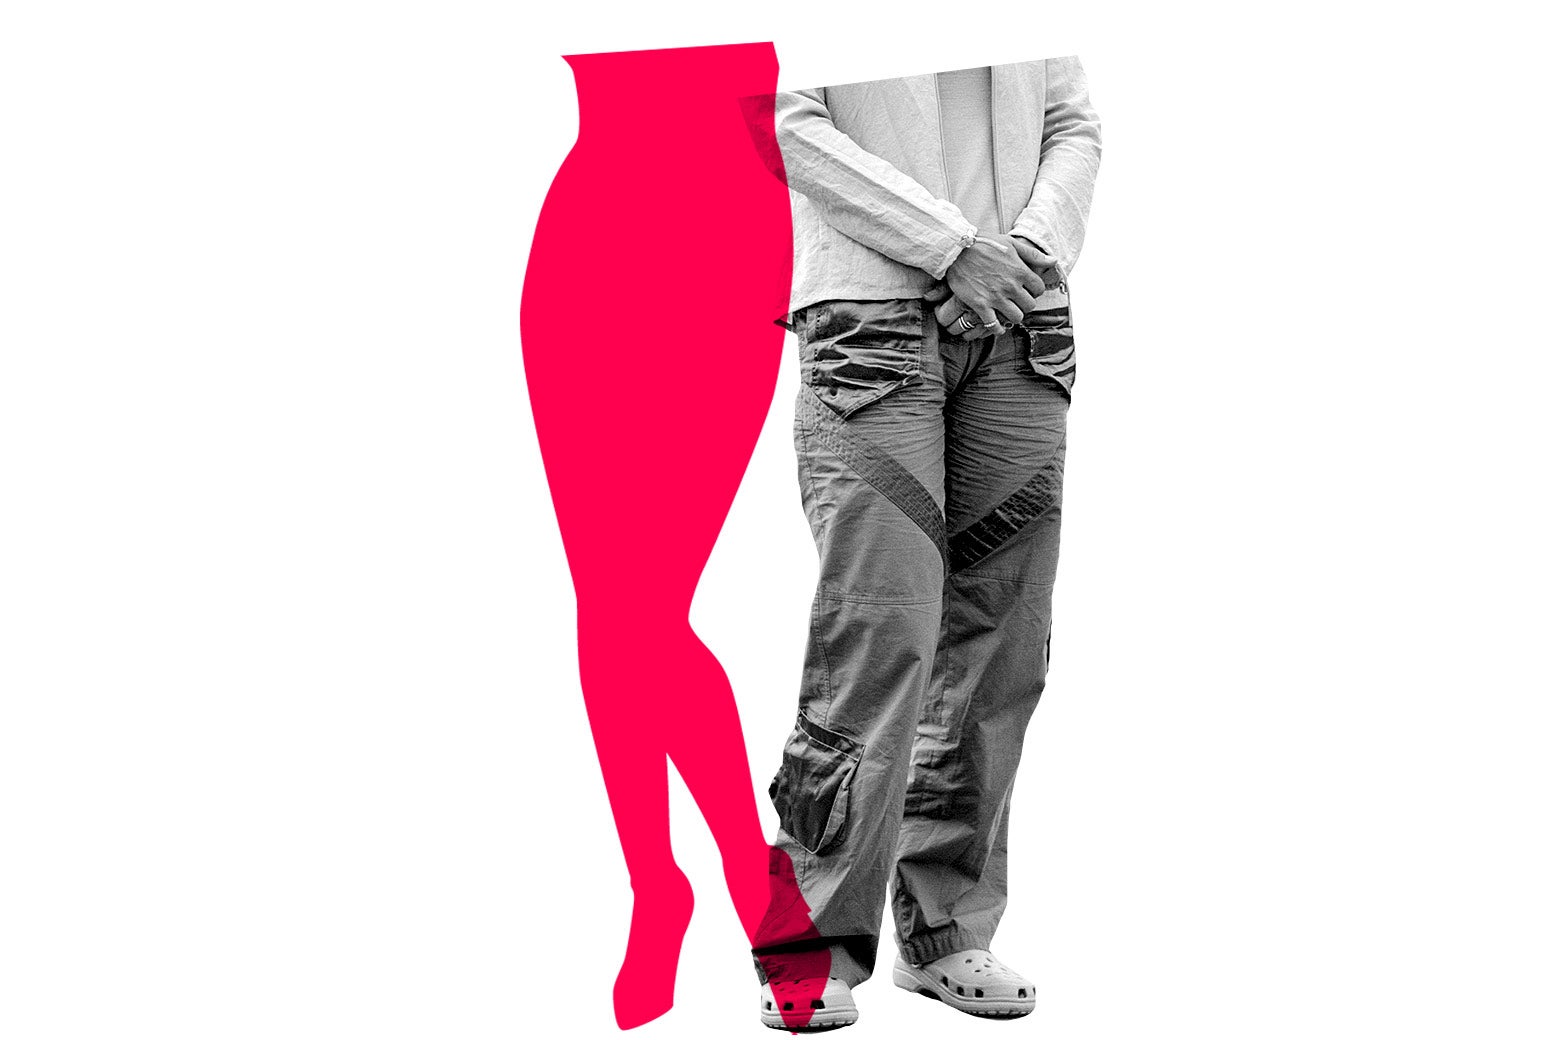 A pink outline of a stereotypical female body next to "male" clothes (chinos, buttondown).